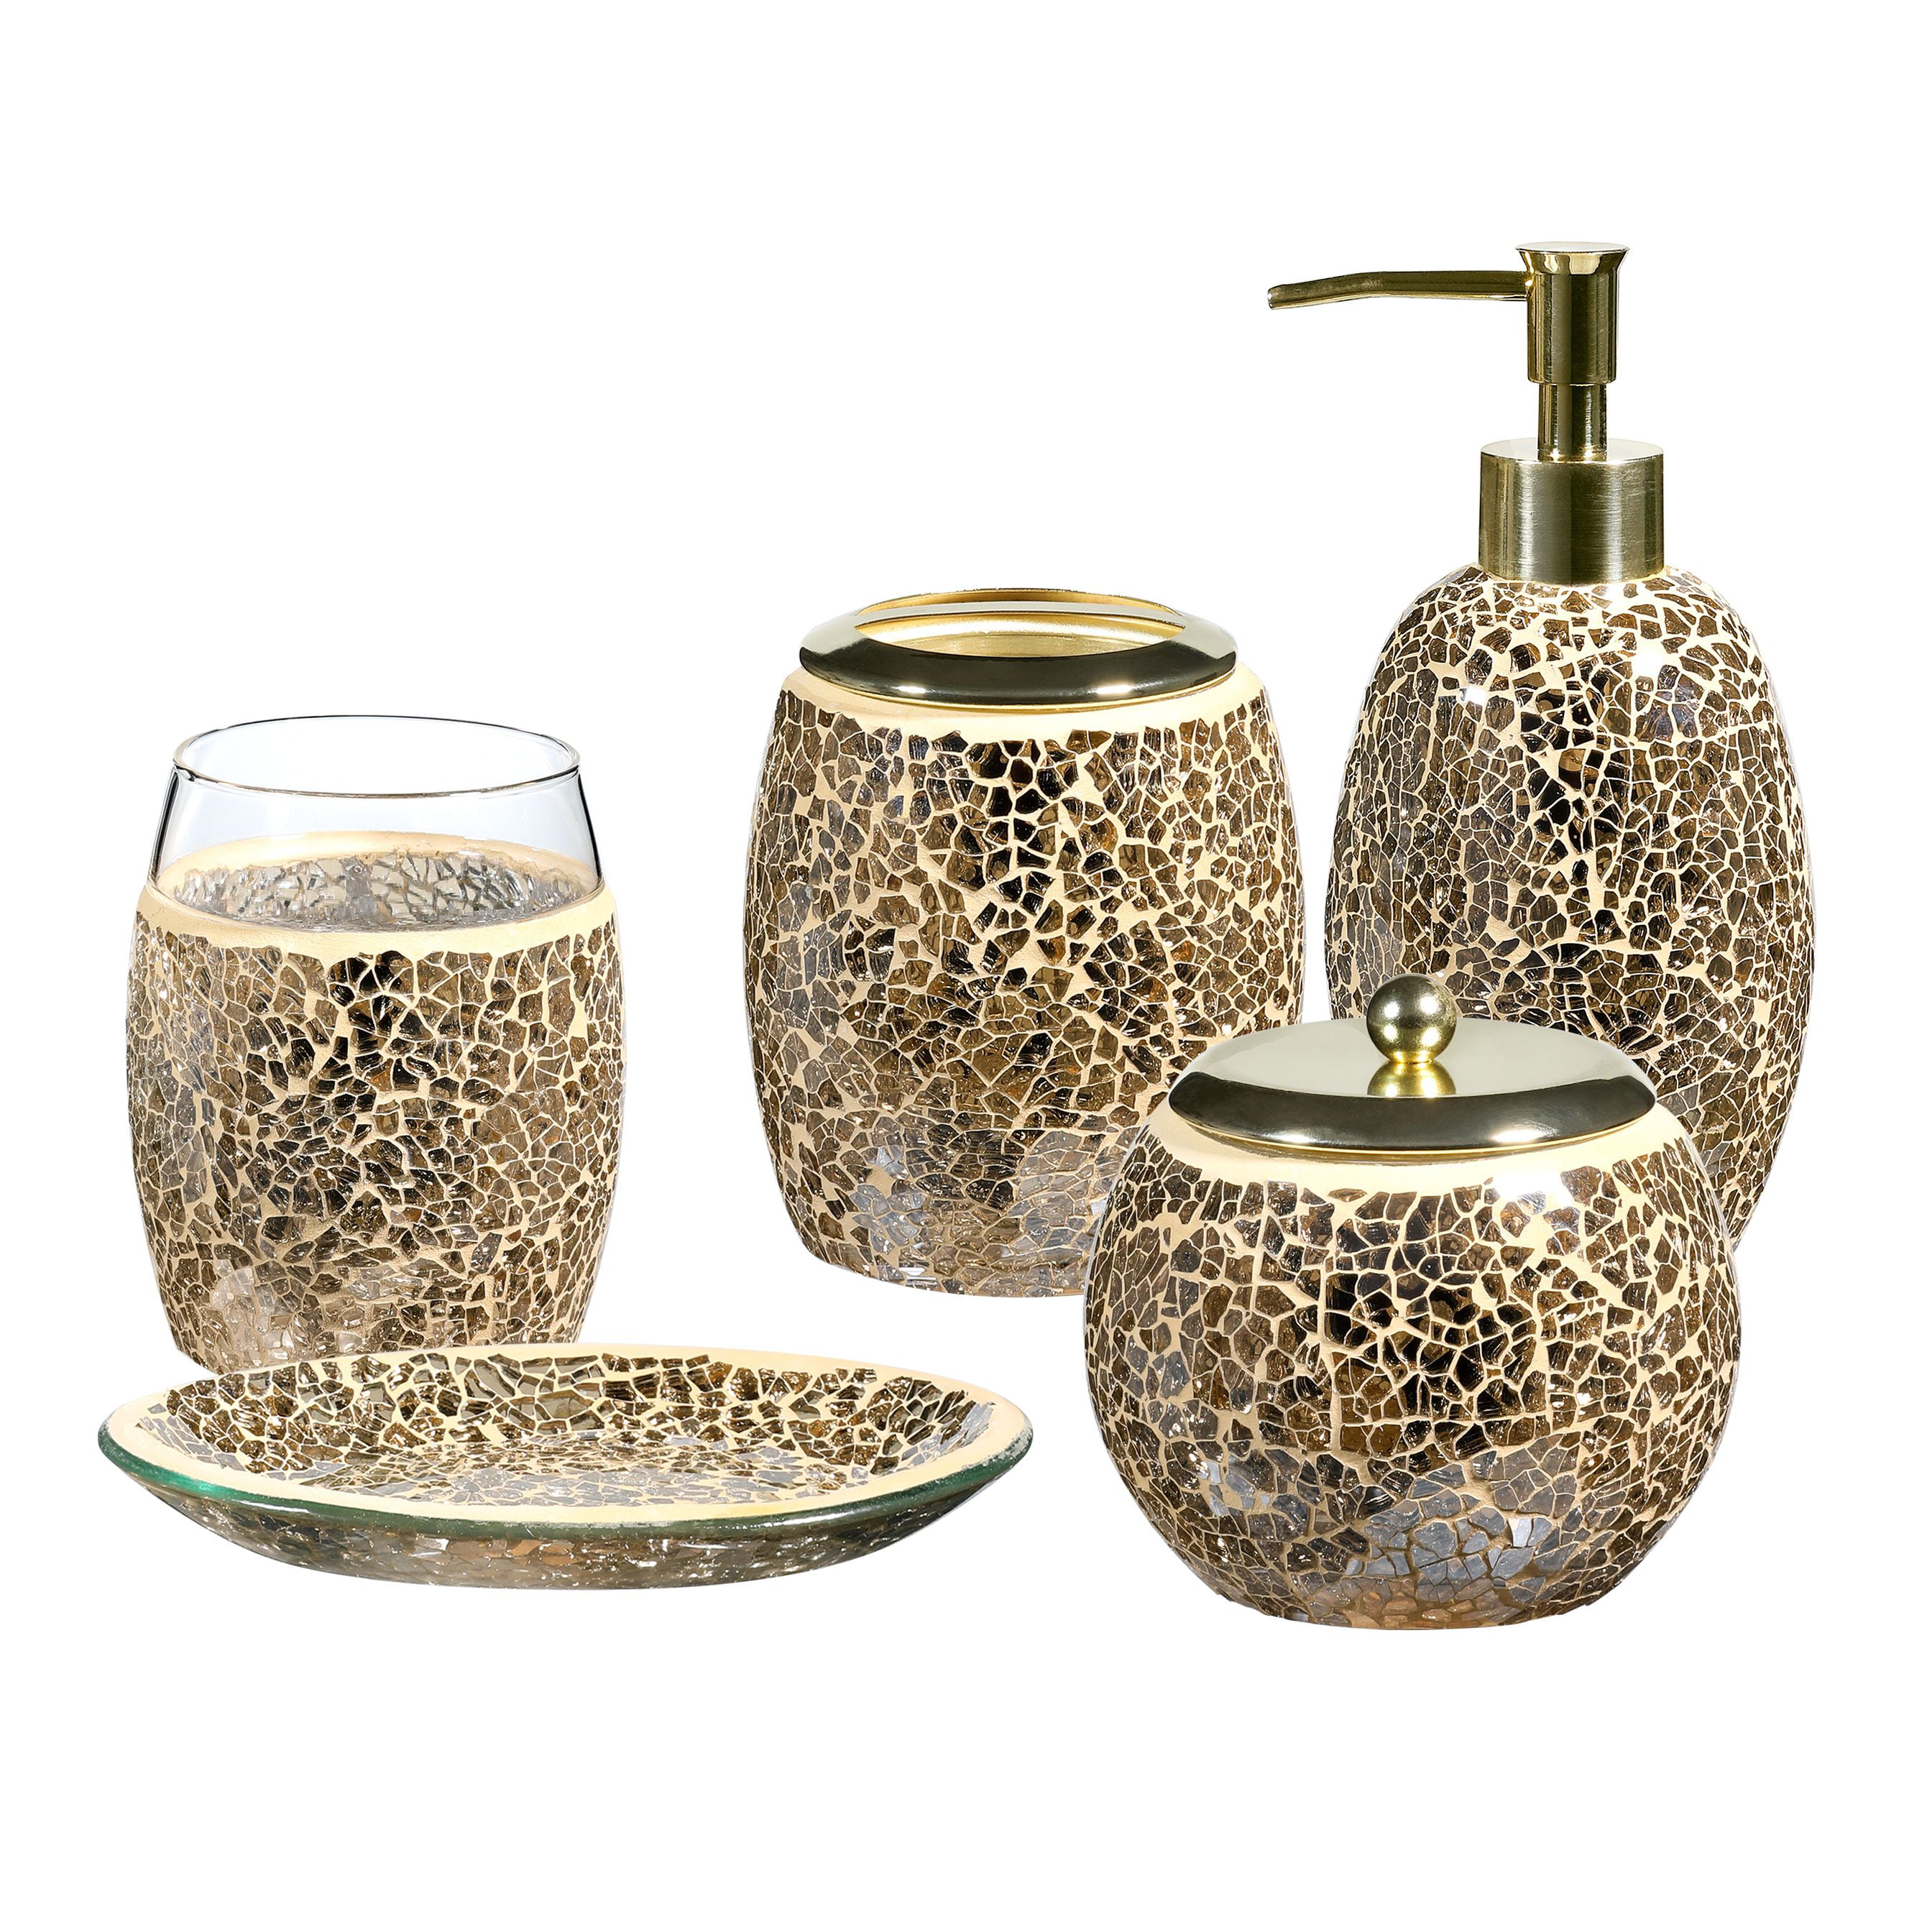 Bathroom Accessories 5-Piece Glass Mosaic Accessory Completes with Lotion Dispenser/Soap Pump, Cotton Jar, Soap Dish,Tumbler, Toothbrush Holder (Gold) - Walmart.com